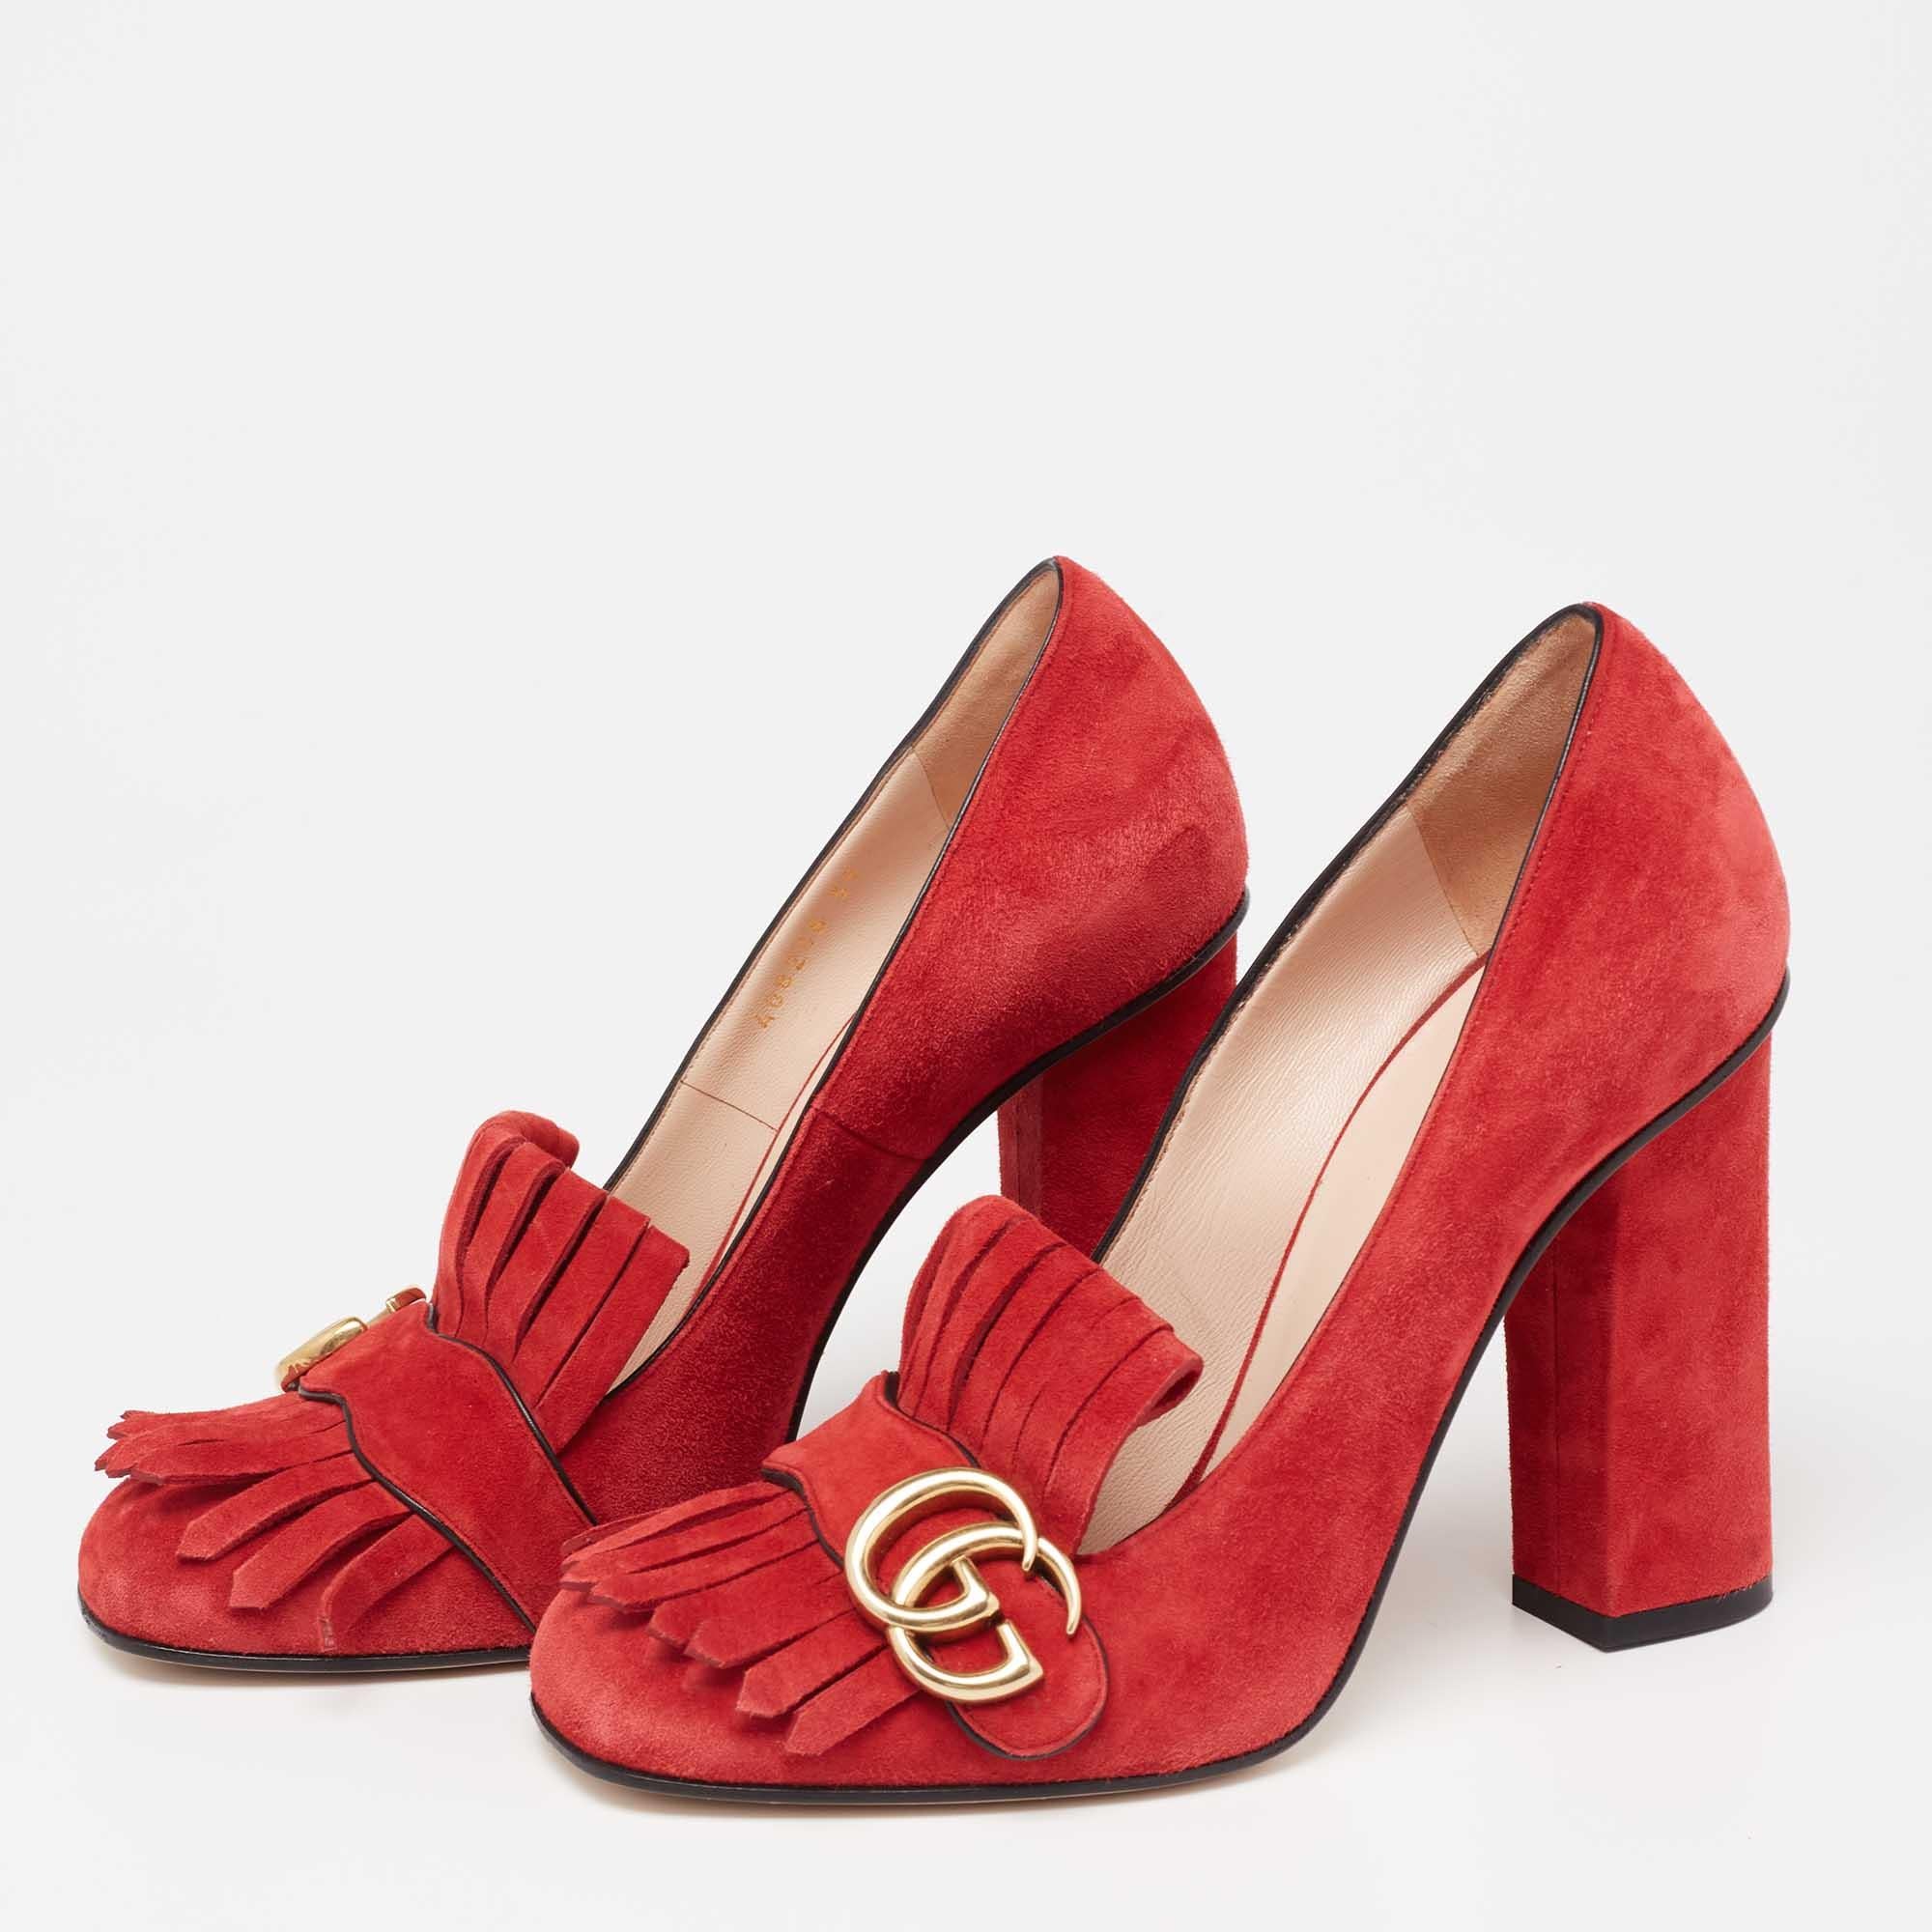 Indulge yourself in a luxurious experience with this pair of Gucci pumps. A perfect accessory to add an extra dose of style to your outfit, it comes made from red suede. The interlocking 'GG' motif on the folded fringe acts as a recognizable